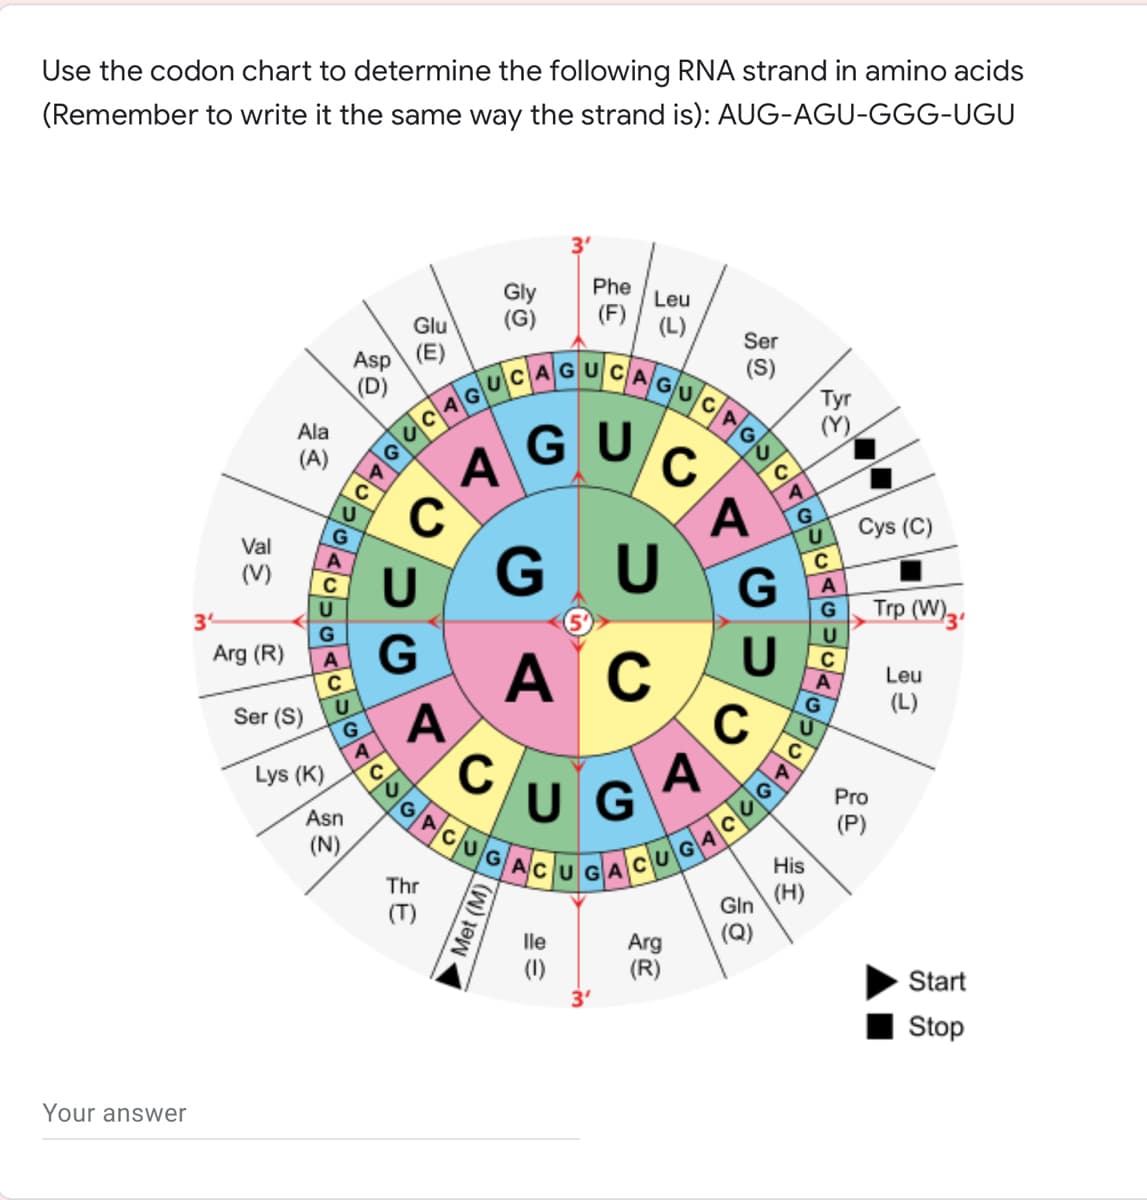 ACUGACUGA
Use the codon chart to determine the following RNA strand in amino acids
(Remember to write it the same way the strand is): AUG-AGU-GGG-UGU
Gly
Phe
Leu
(F) (L)
Glu
Ser
Asp (E)
(D)
(S)
AGU
C
Tyr
(Y)
Ala
AGU
(A)
A
Val
Cys (C)
G U
(V)
C
G
A
34
Trp (W)3
G
G
Arg (R)
U
AG
A C
C
Leu
Ser (S)
U
(L)
A
C
G.
A
Lys (K)
CUG
A
Pro
Asn
(N)
CUGACU G
(P)
His
Thr
Gln (H)
(Q)
Arg
(R)
Start
Stop
Your answer
Met (M)O
